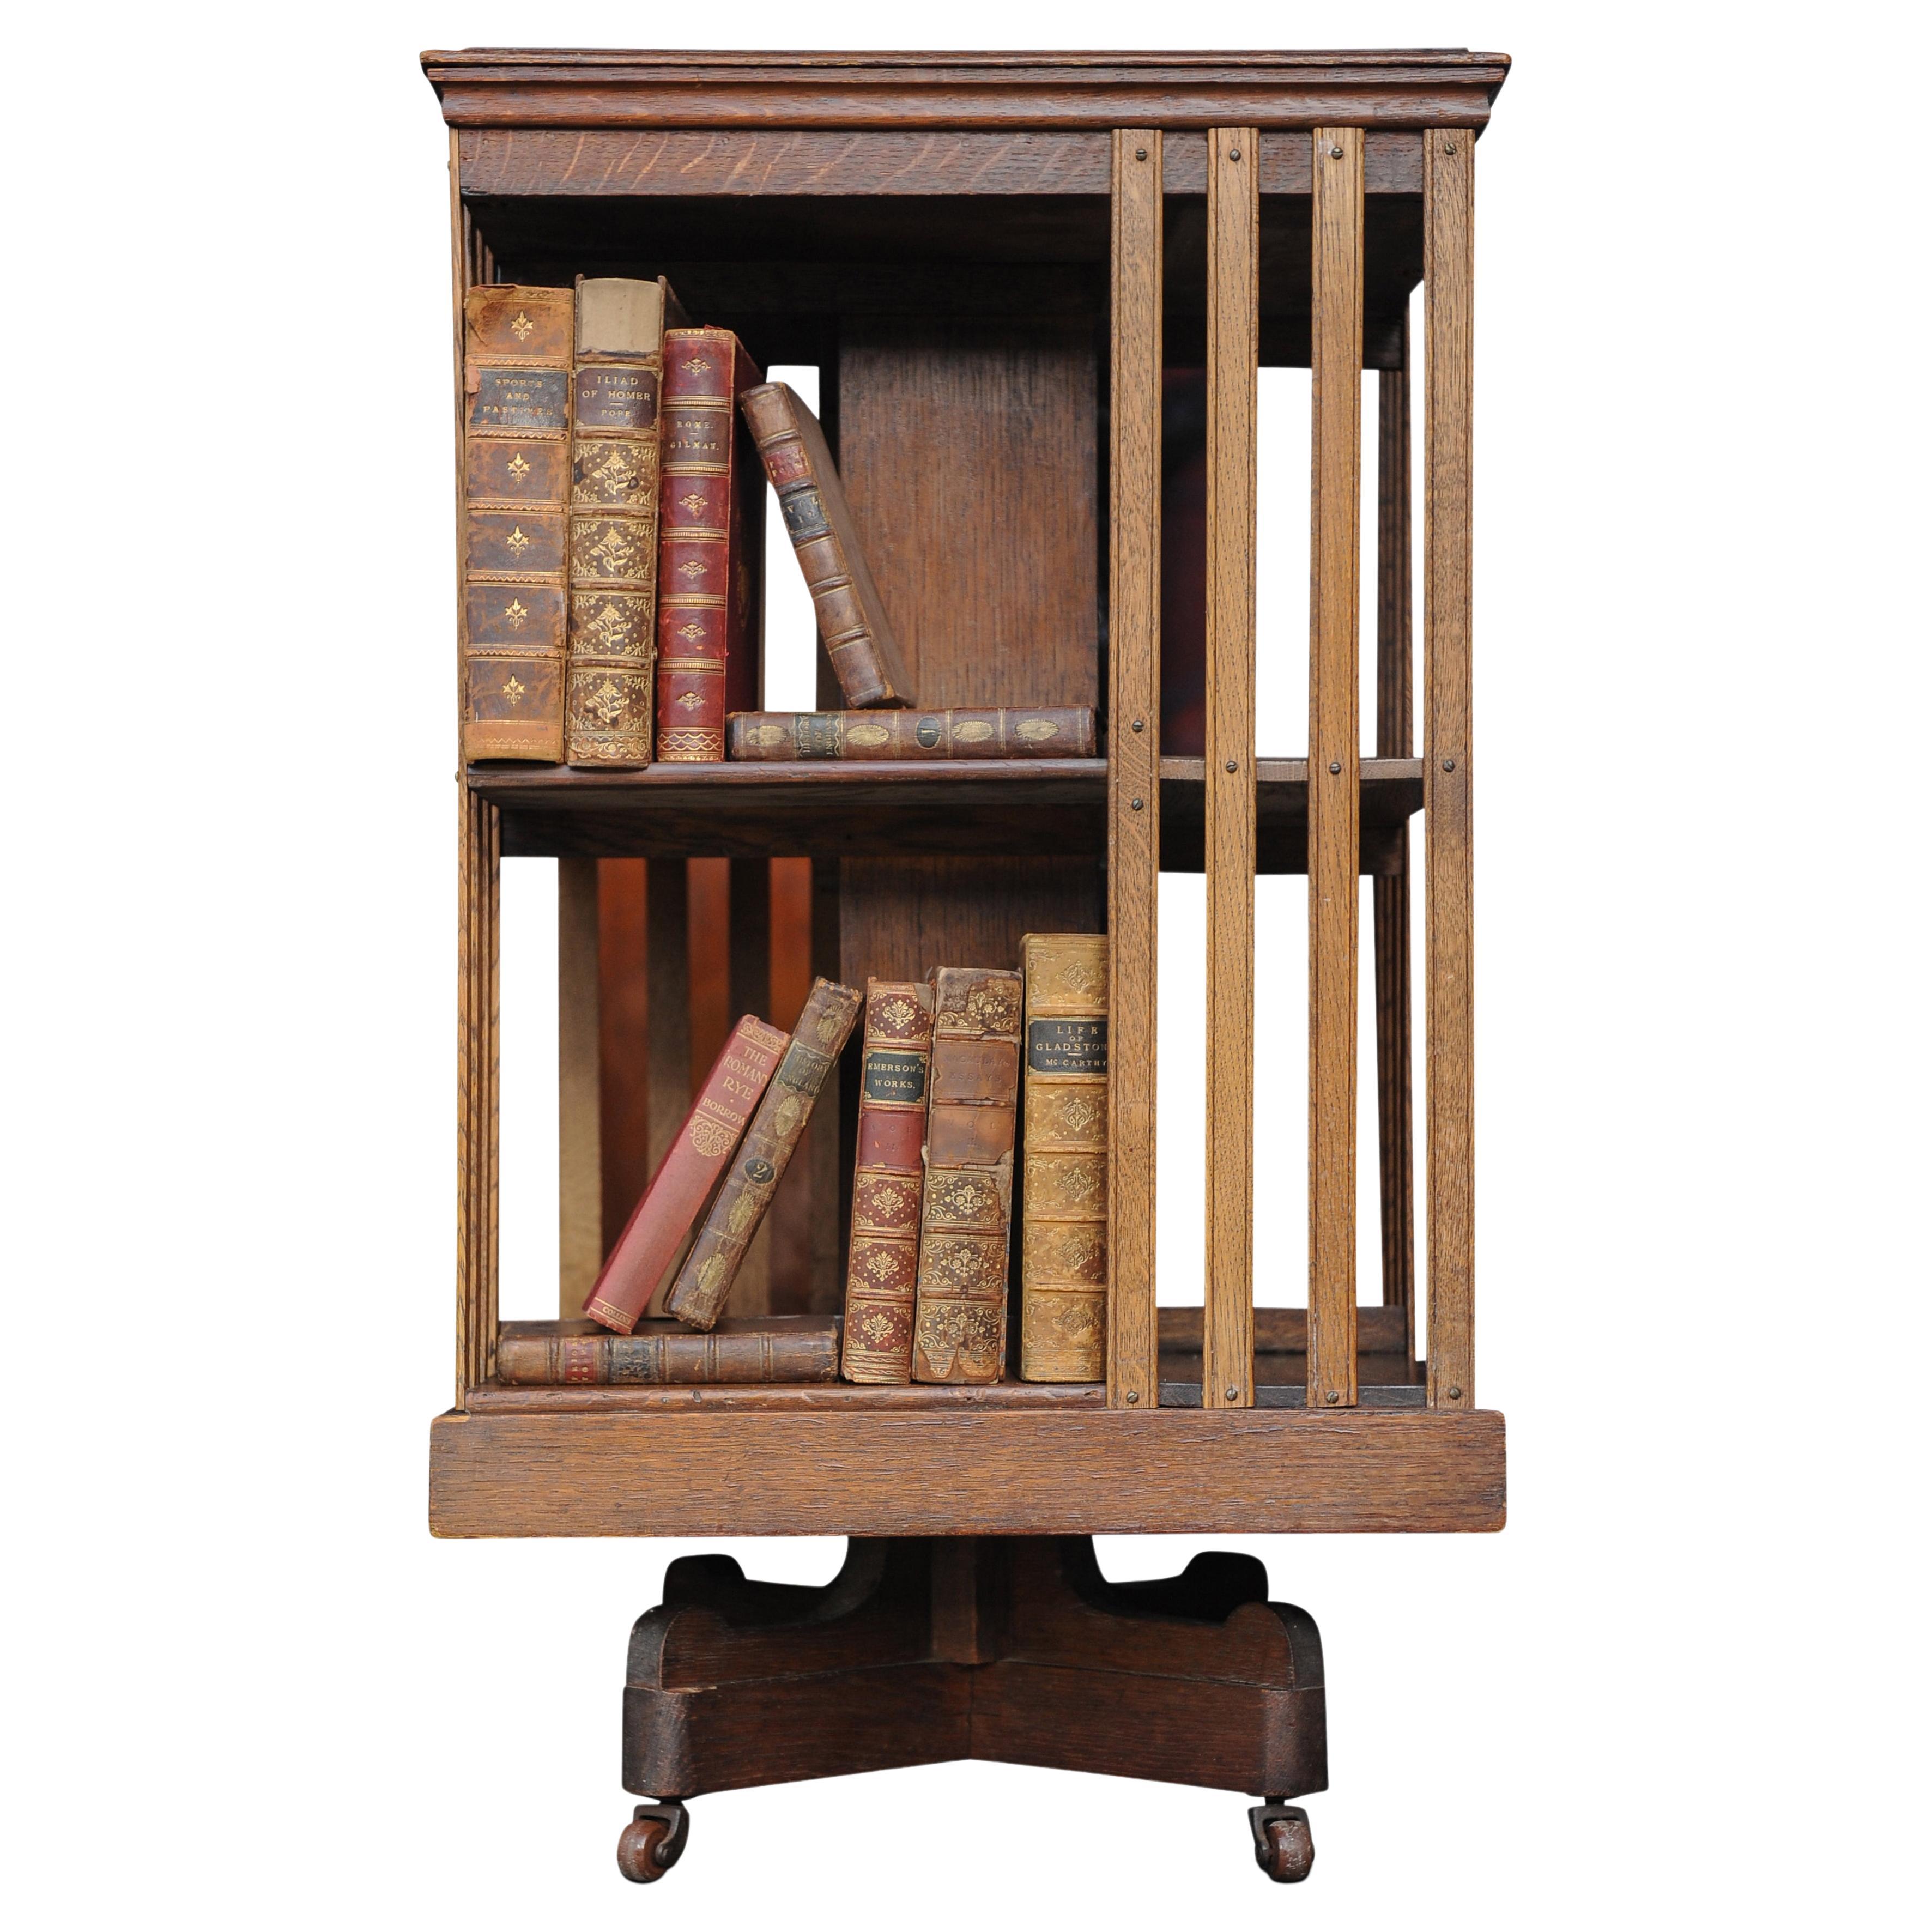 An Elegant Edwardian Revolving Two Tier Oak Library Bookcase With Slatted Sections & A Graduated Top Set On A Revolving Ebonised Base With Porcelain Castors 

Extra dimensions 
Shelf depth 15cm
Shelf width 29cm 
Shelf height top 25cm

Shelf height